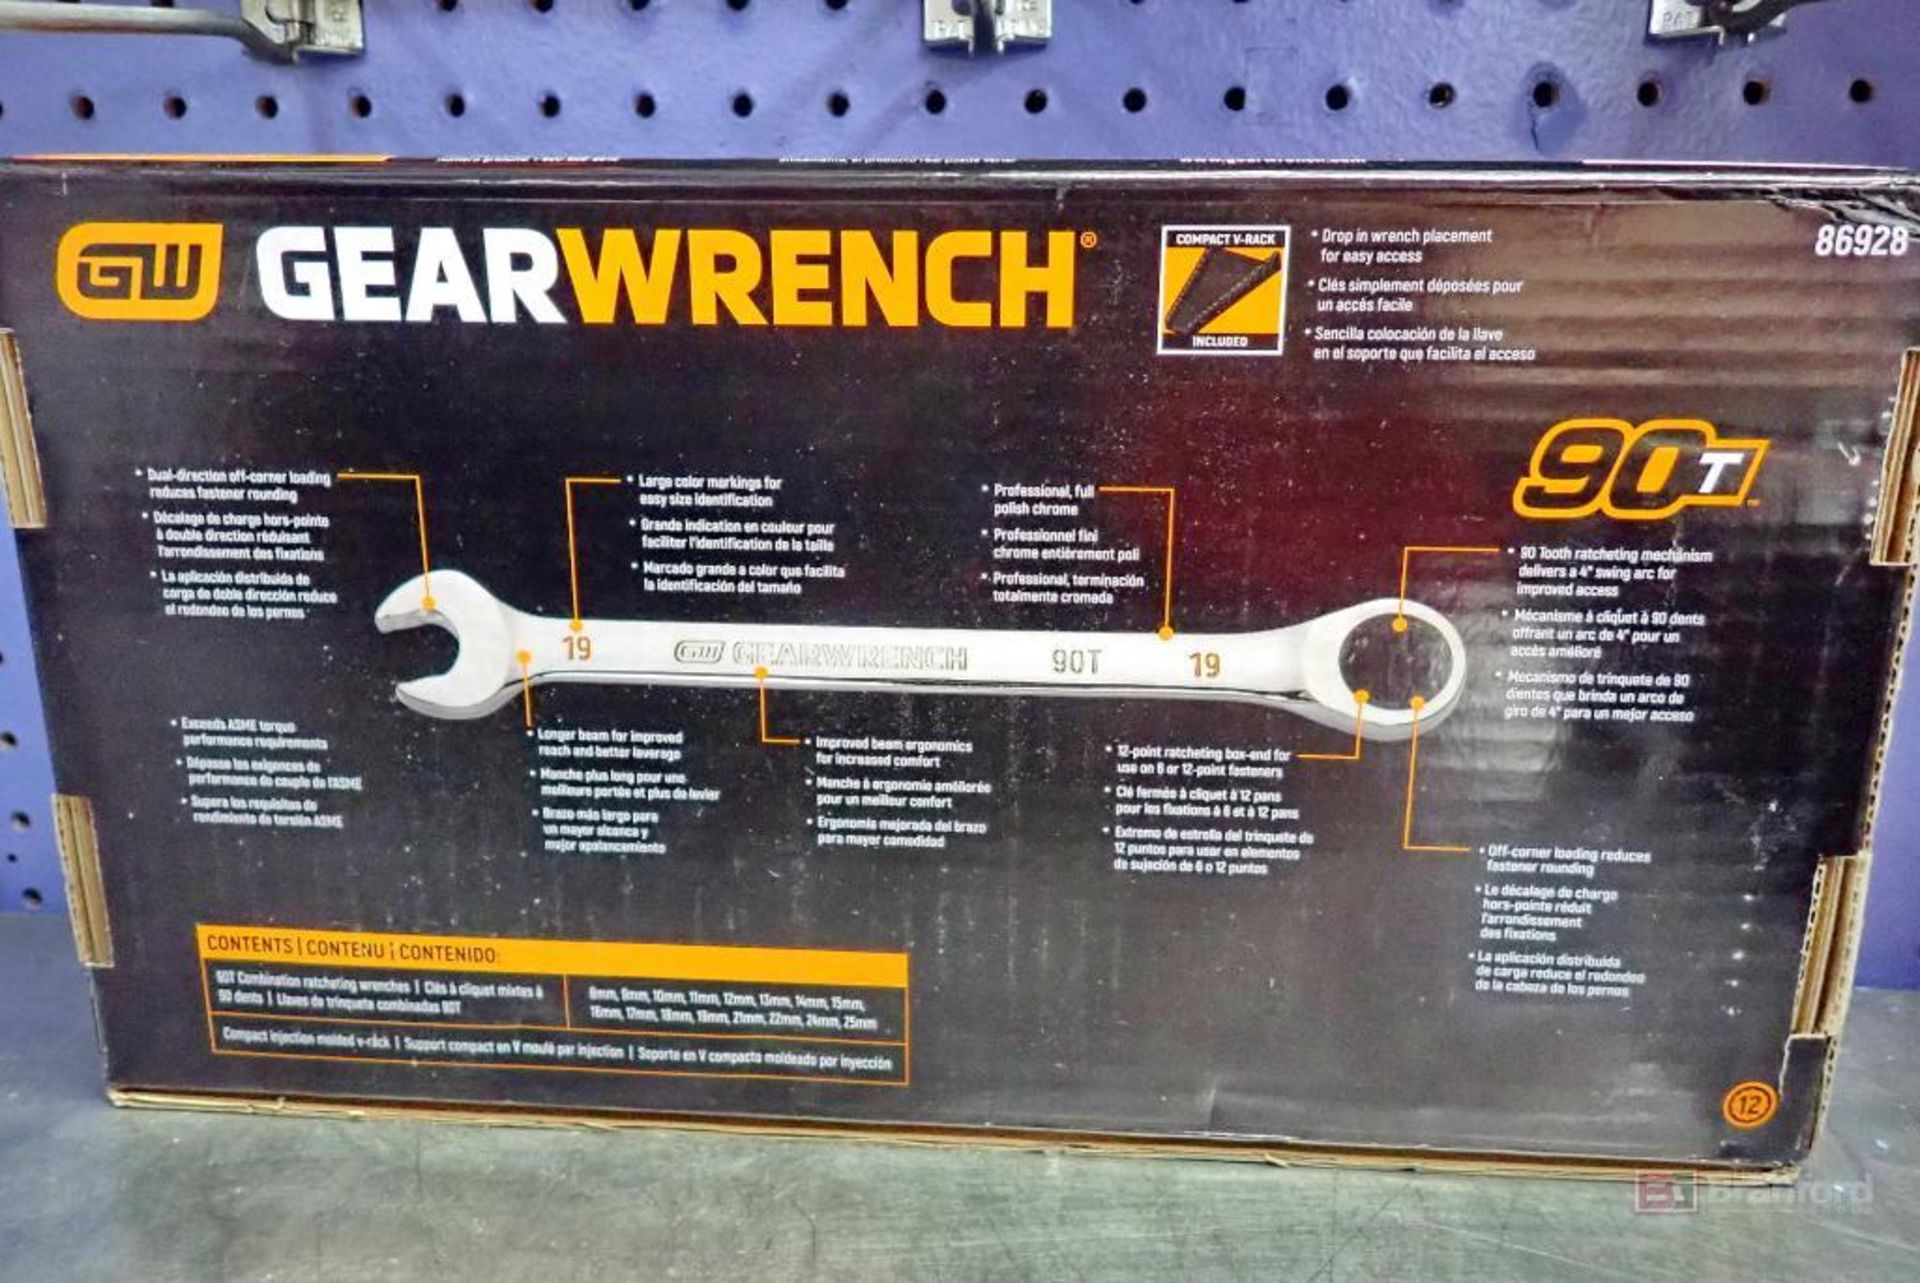 (2) GearWrench 86426 120XP 14 Pc. Metric Combination Ratcheting Wrench Sets - Image 3 of 4